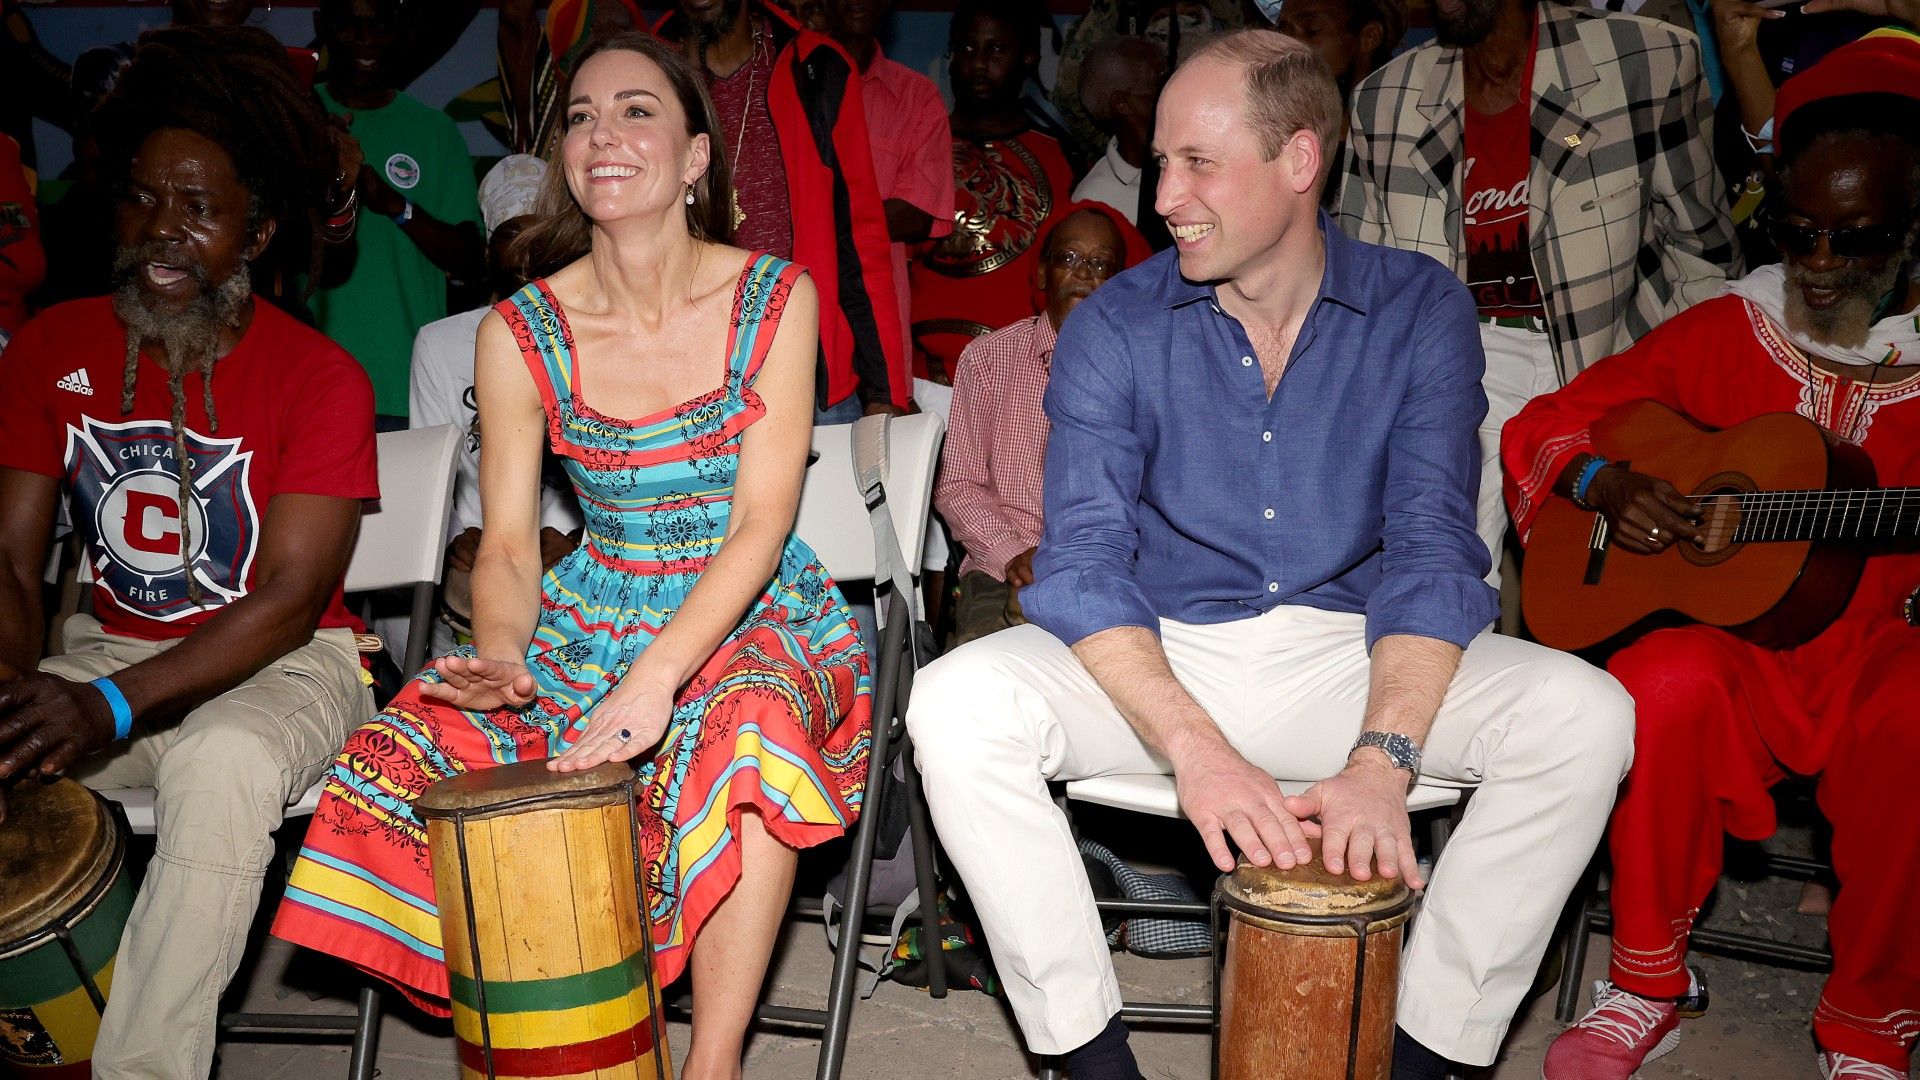 <p>                     Being in the Caribbean - a place known for inspiring music from the likes of Bob Marley - must have really stirred something in William and Kate during their 2022 overseas tour.                   </p>                                      <p>                     Letting their hair down (metaphorically for William, literally for Catherine) the pair got in on the fun and made their own kind of music, banging away on some drums as they were supported by various other musicians.                   </p>                                      <p>                     The musical moment took place when they visited Trench Town Culture Yard Museum, where Bob Marley used to live.                   </p>